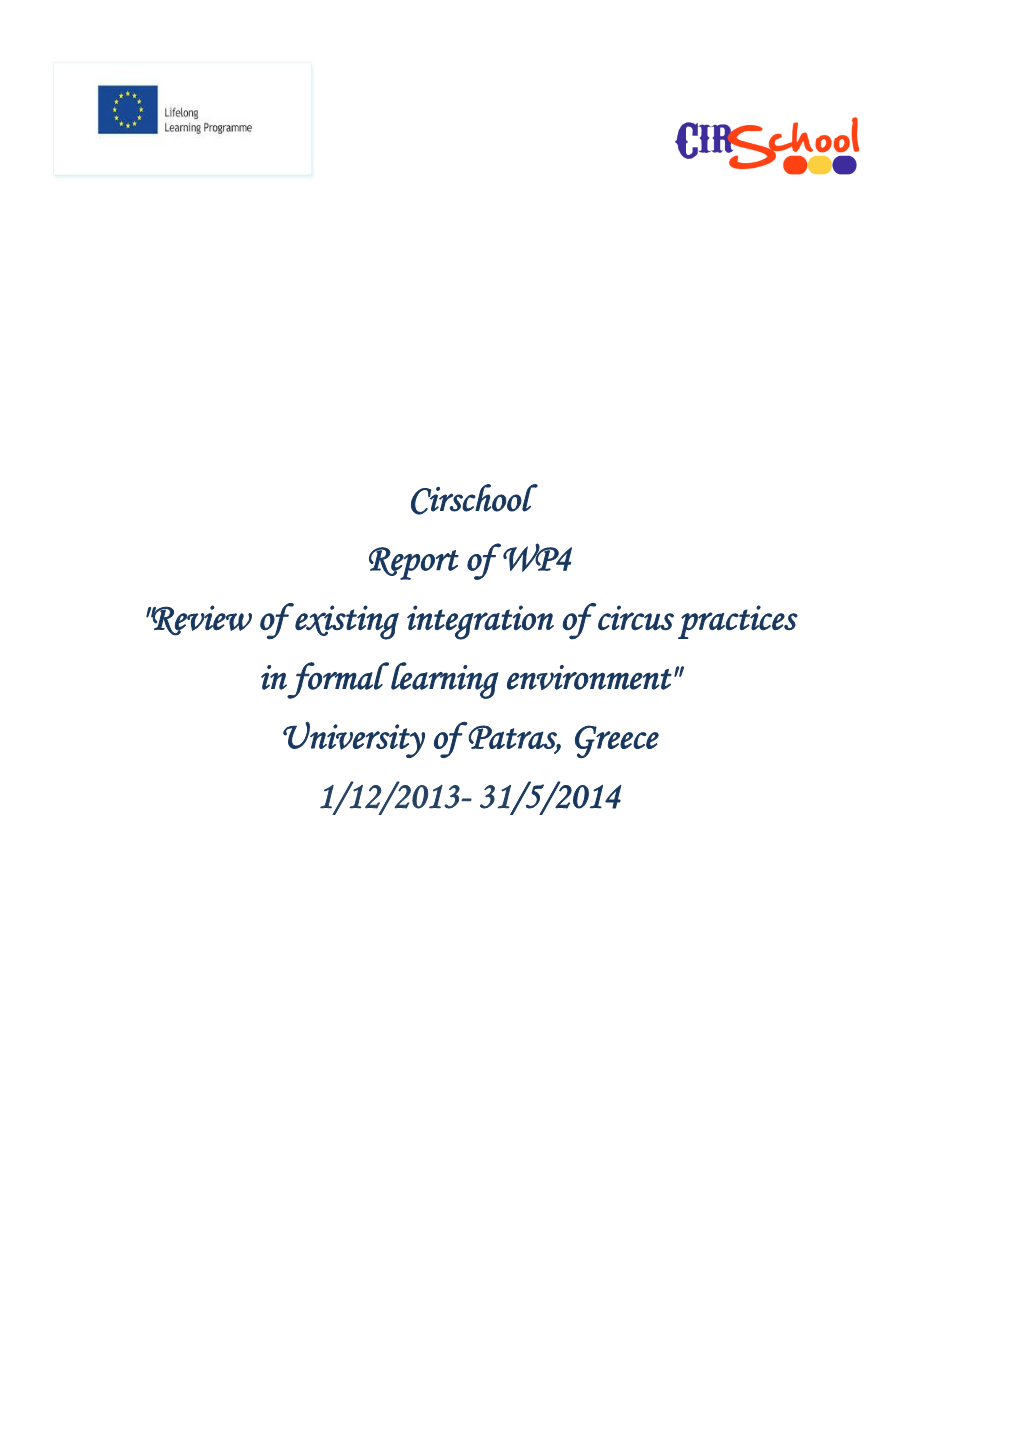 Cirschool Report of WP4 "Review of Existing Integration of Circus Practices in Formal Learning Environment" University of Patras, Greece 1/12/2013- 31/5/2014